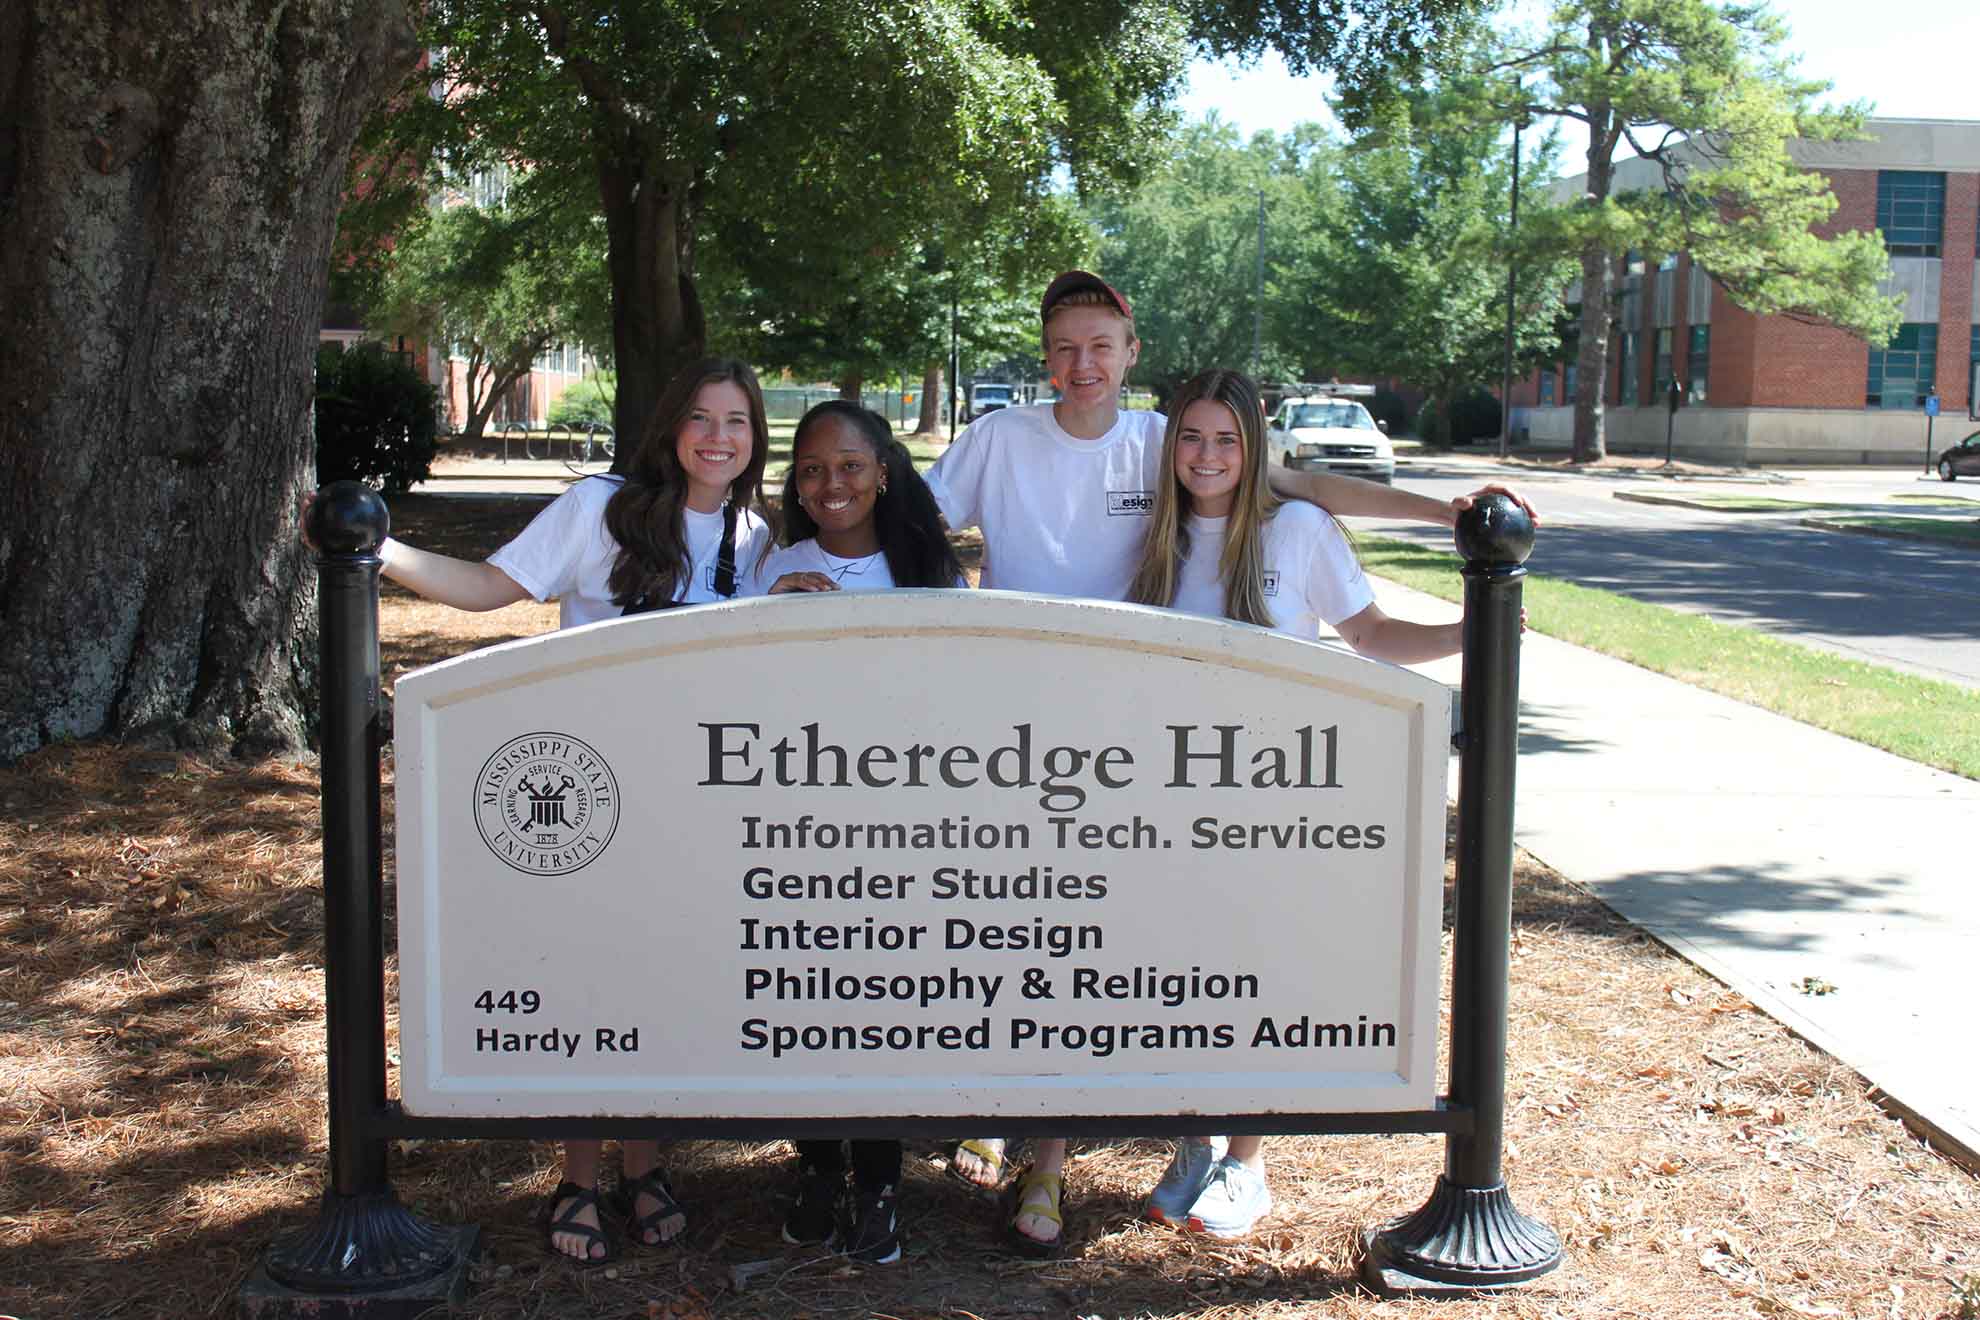 The campers take a picture with the Etheredge sign.